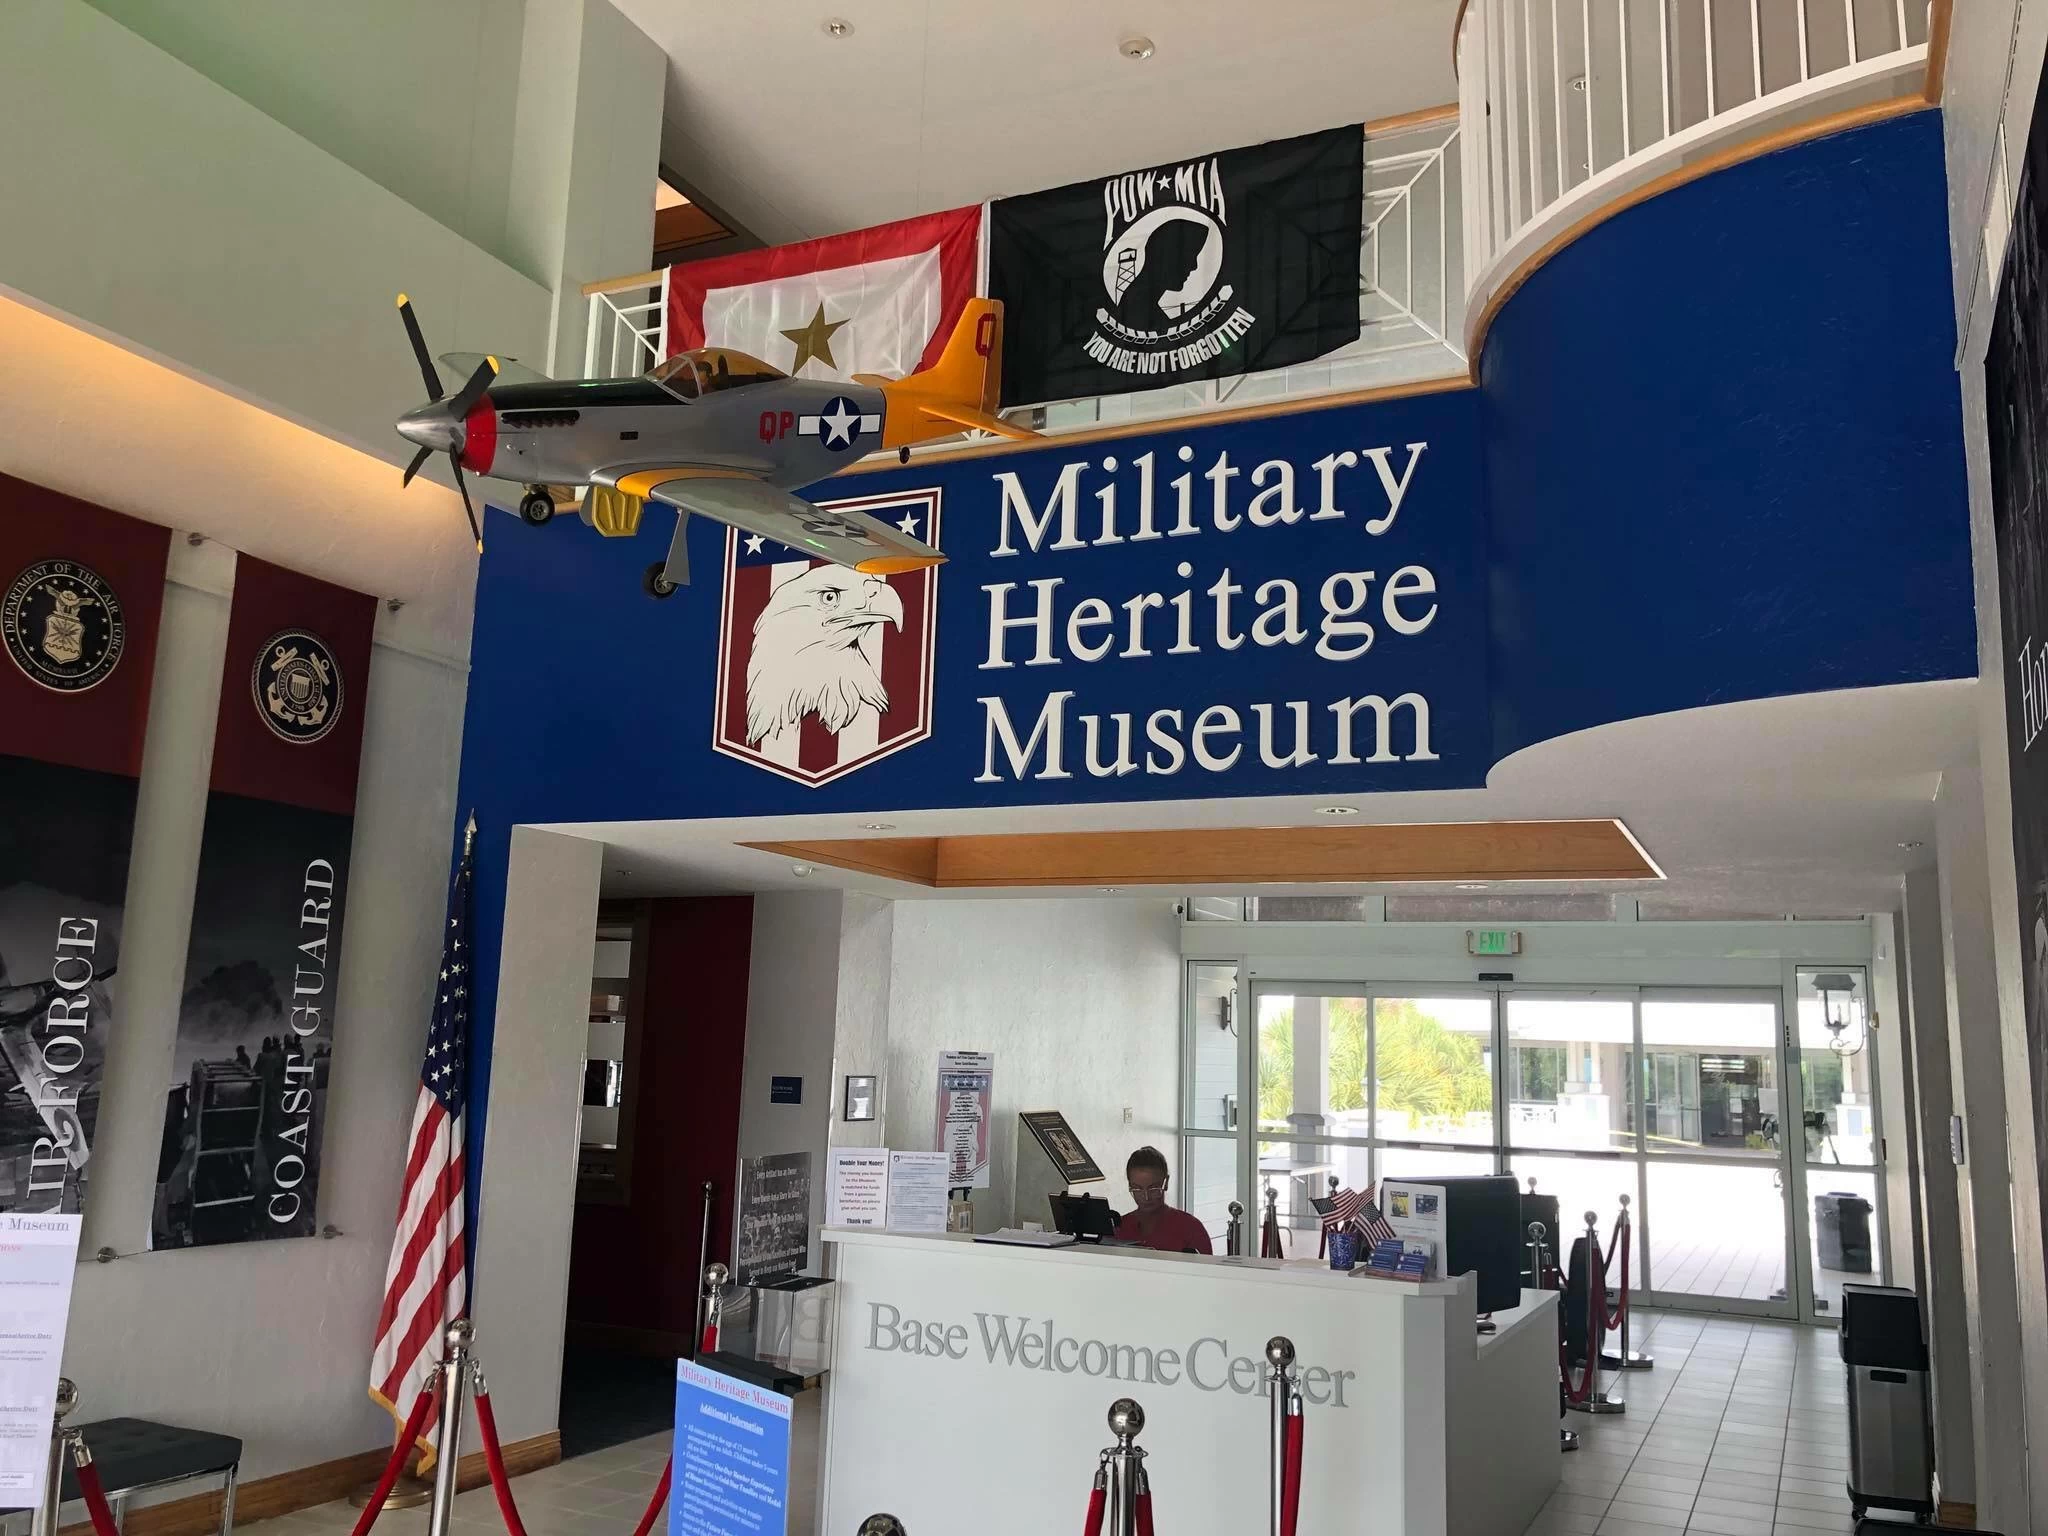 Flags and banners hang at the entrance to the Military Heritage Museum in Southwest Florida